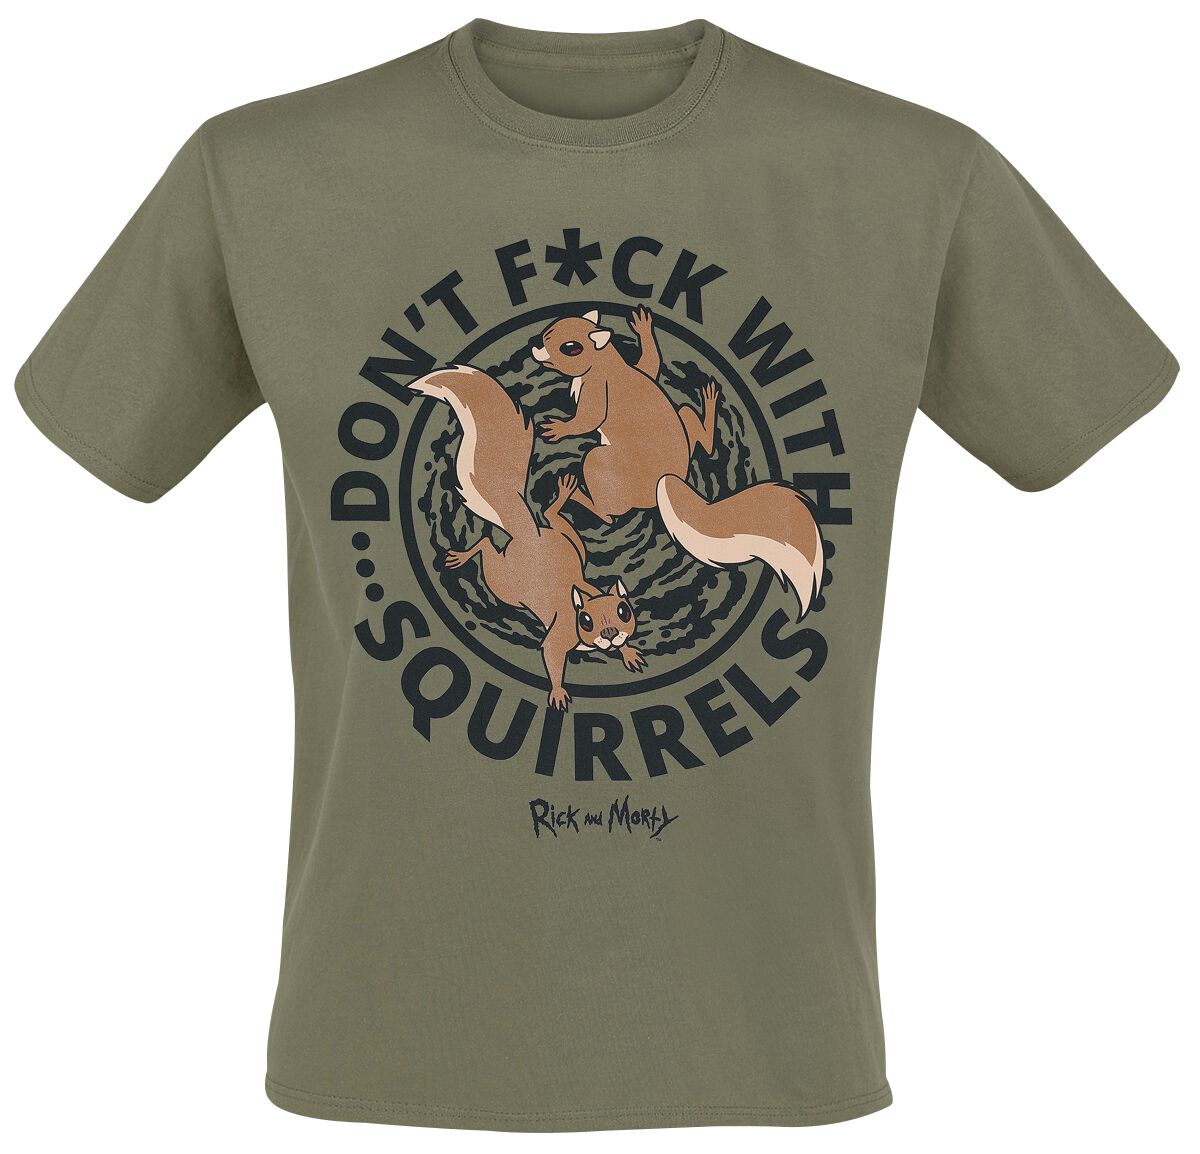 Don't F*ck With Squirrels T-Shirt khaki von Rick And Morty